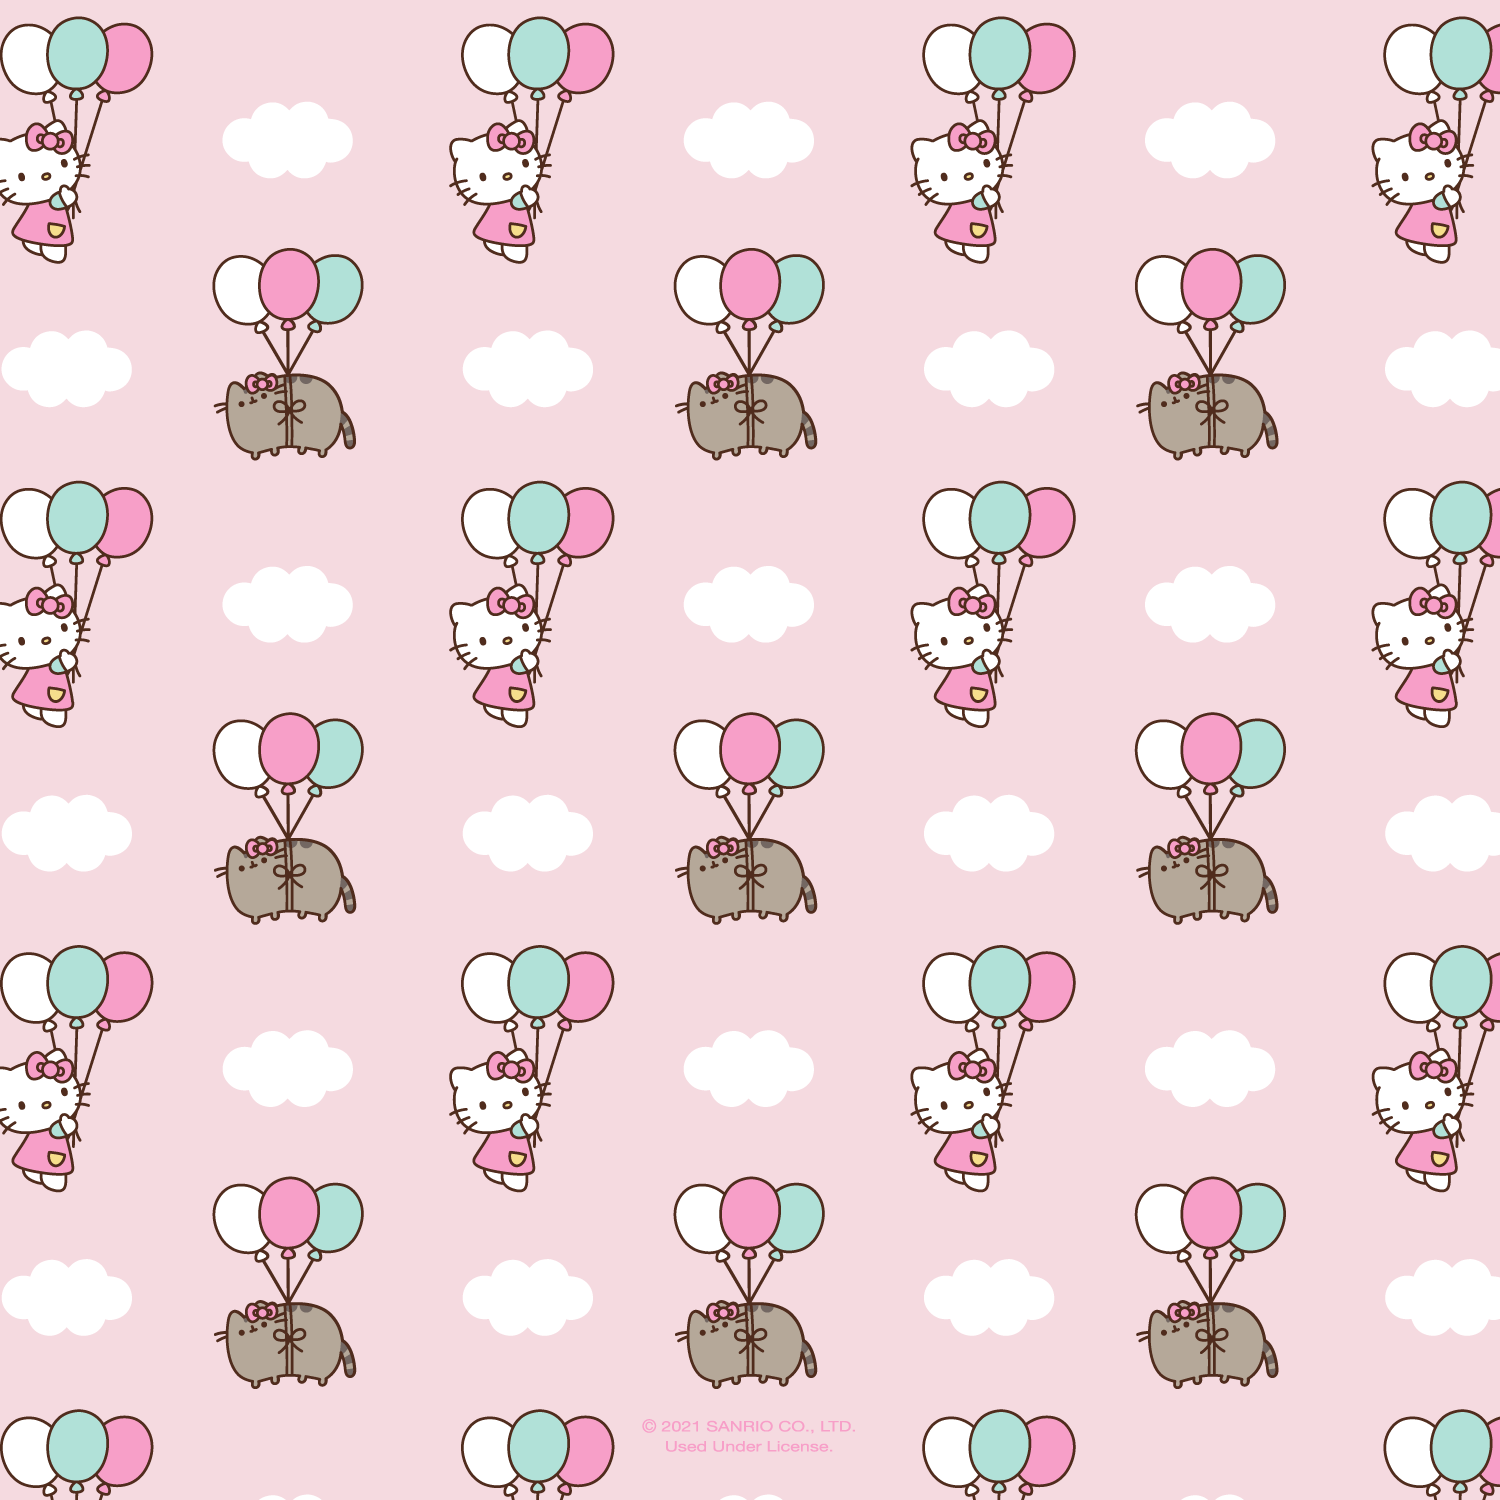 Hello Kitty this iconic duo on the go with new background for your phone